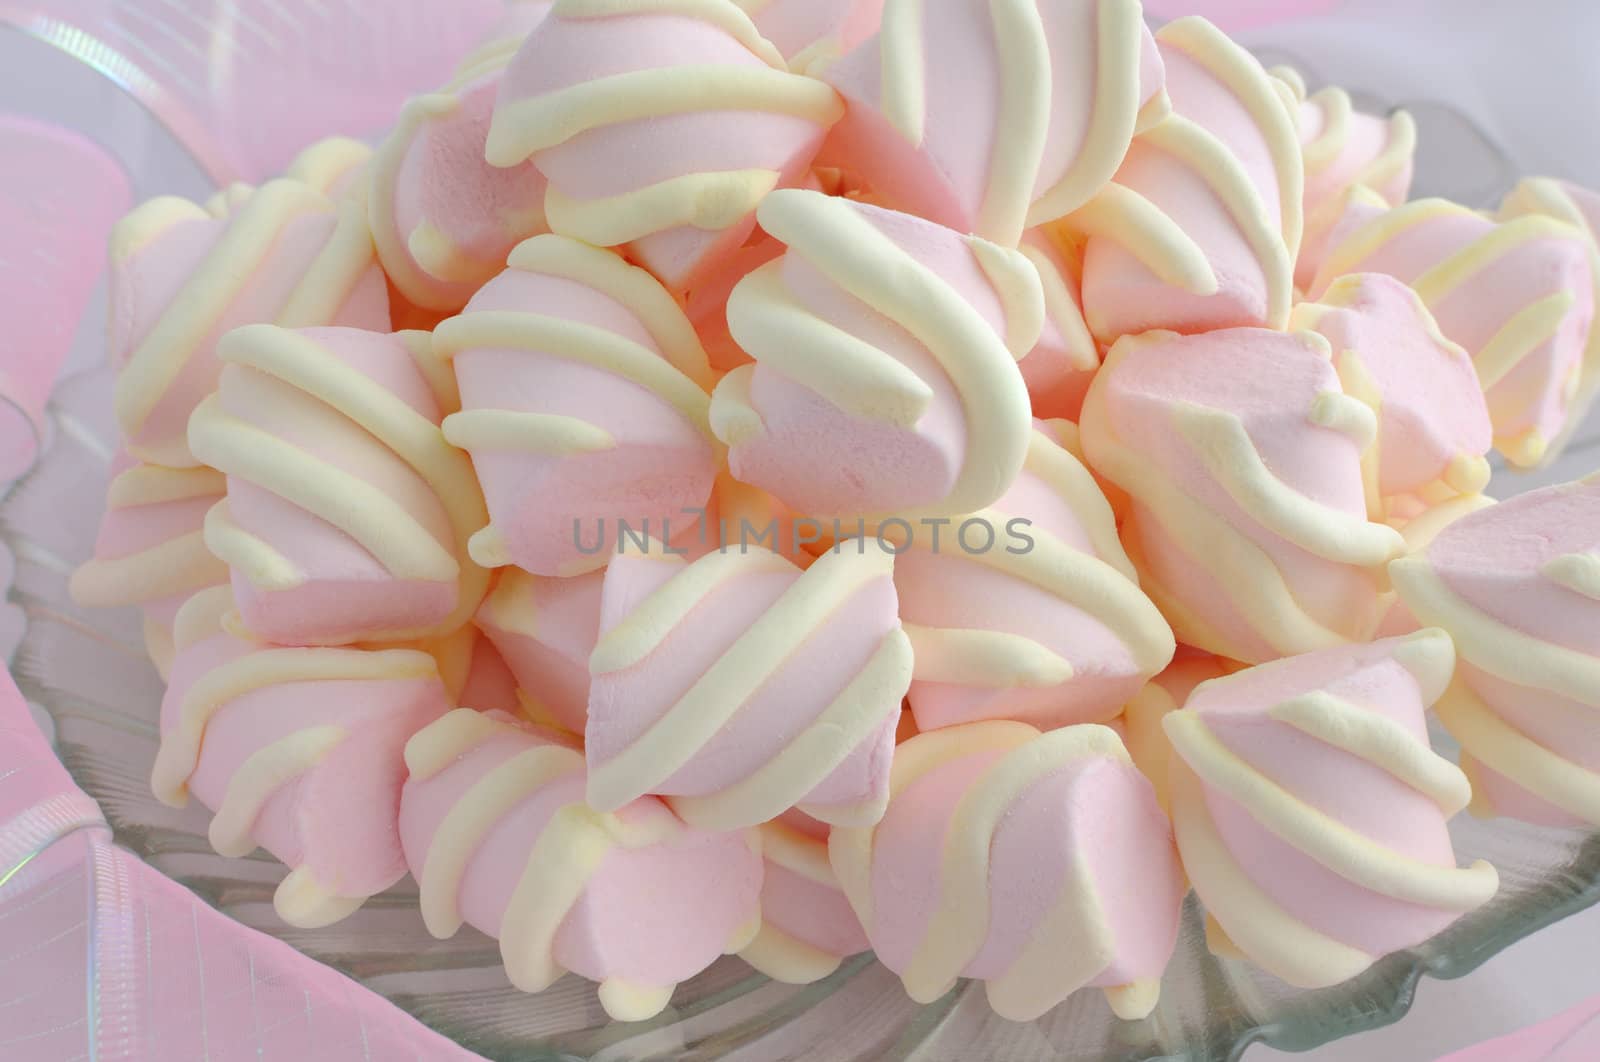 Marshmallows close-up by Apolonia